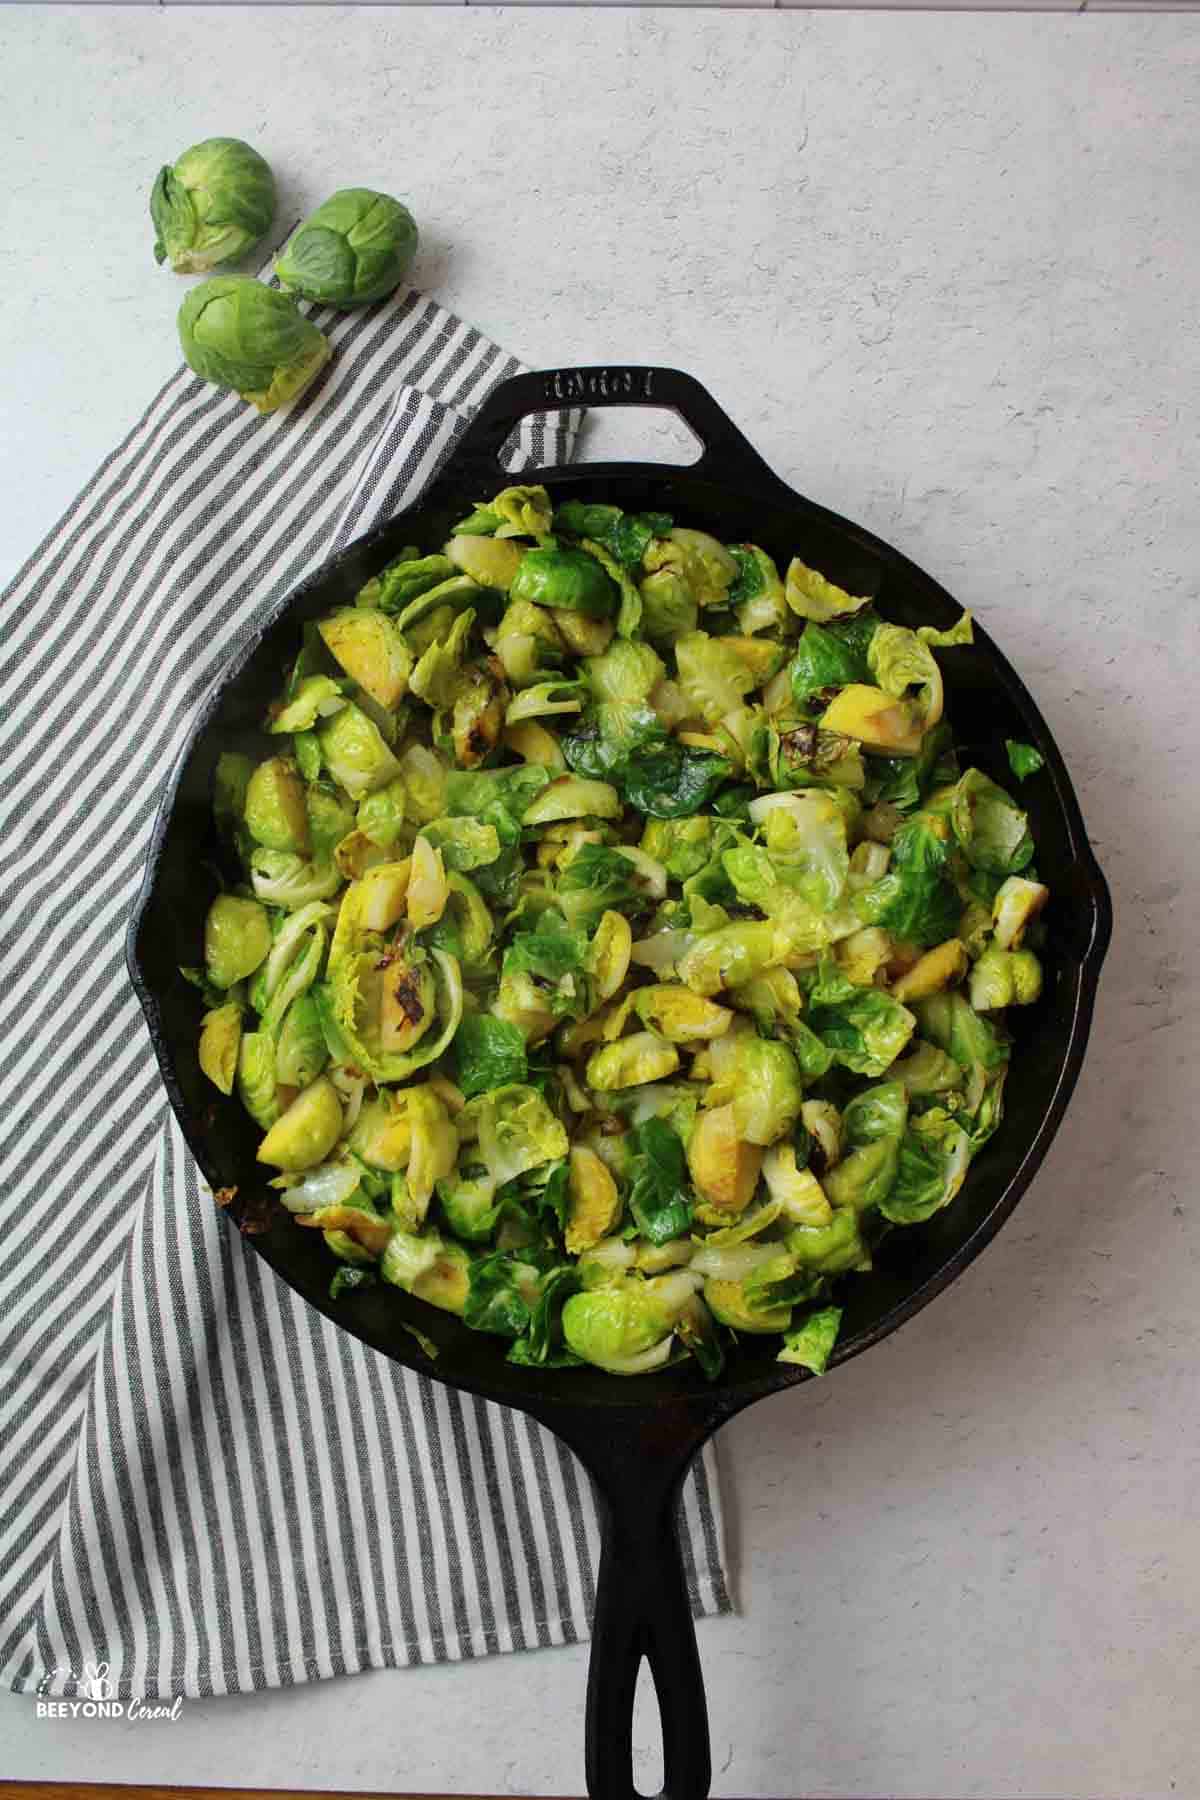 cookd brussel sprouts in a cast iron skillet